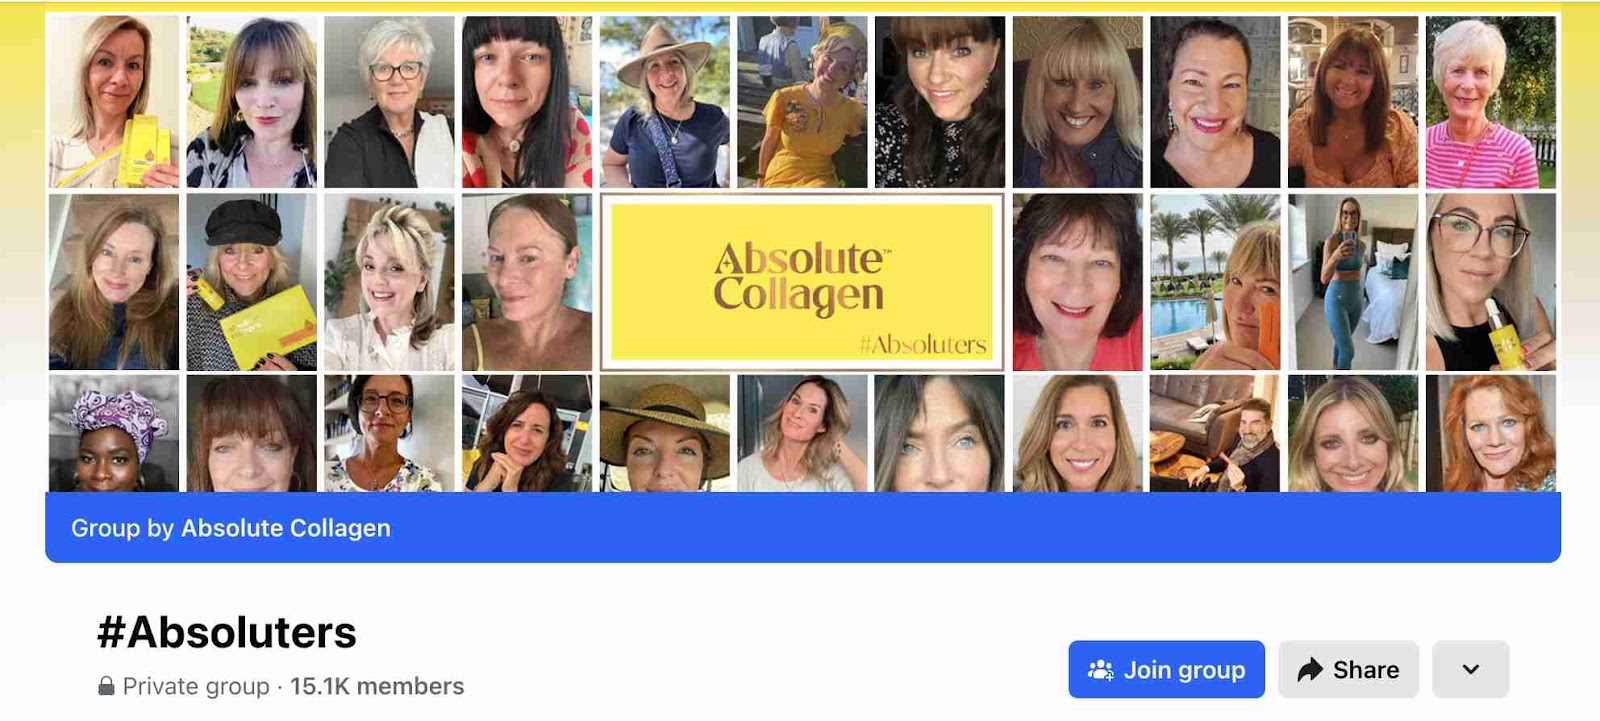 Absolute Collagen's Customer Advocates